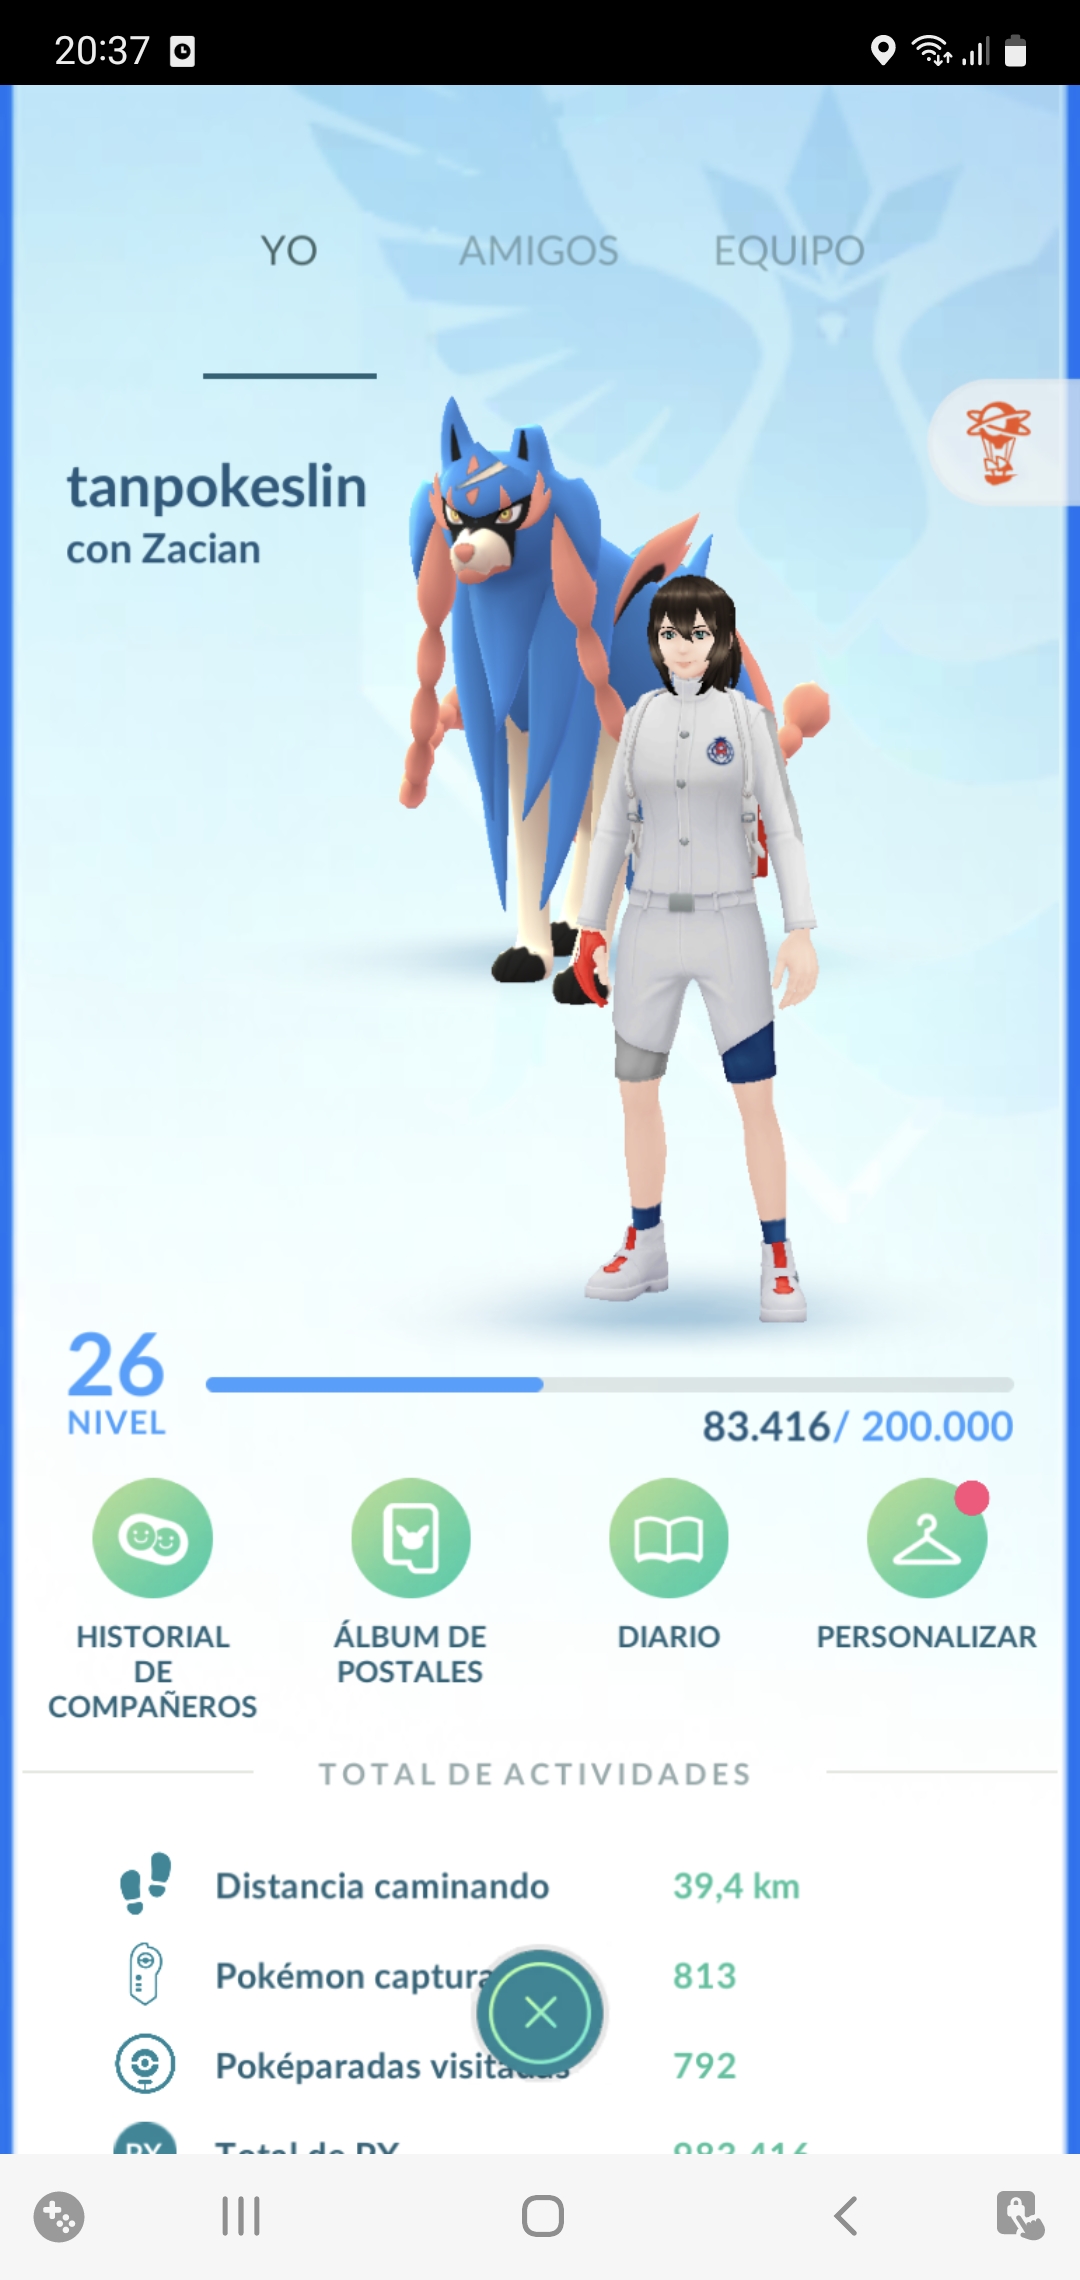 Having 31 legendary characters and 1 Lugia Shiny at level 26